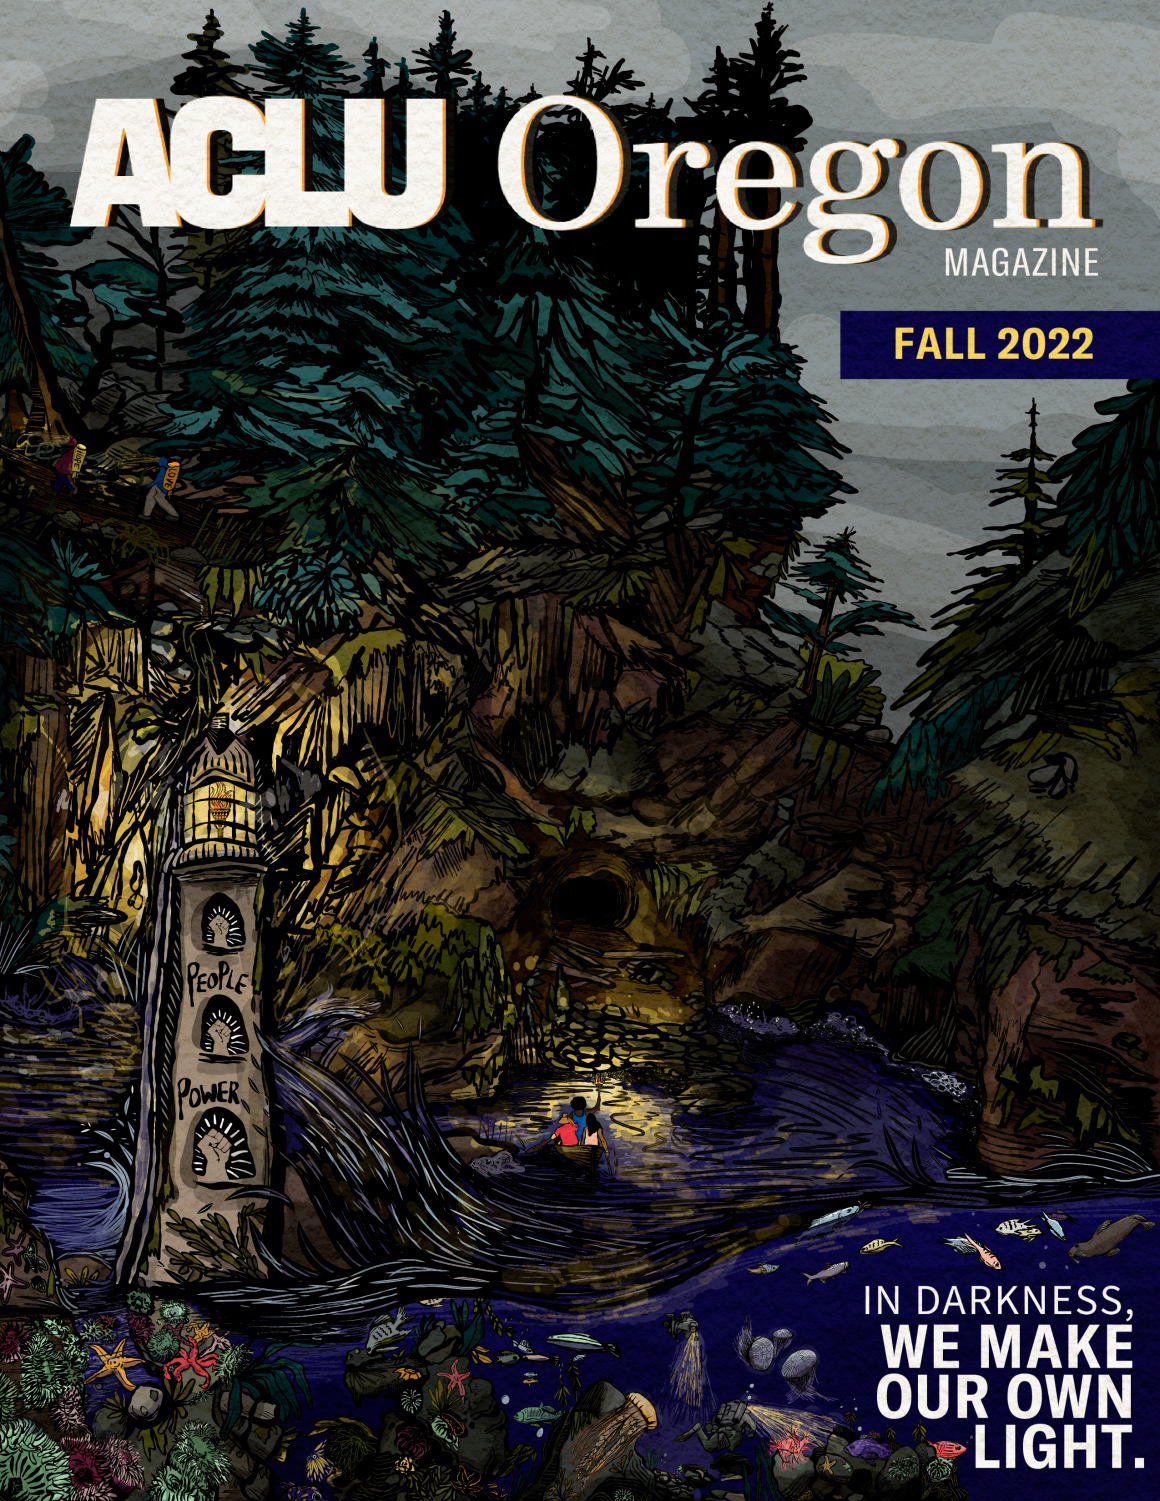 illustrated cover of ACLU Oregon's fall 2022 magazine, entitled "In darkness, we make our own light"